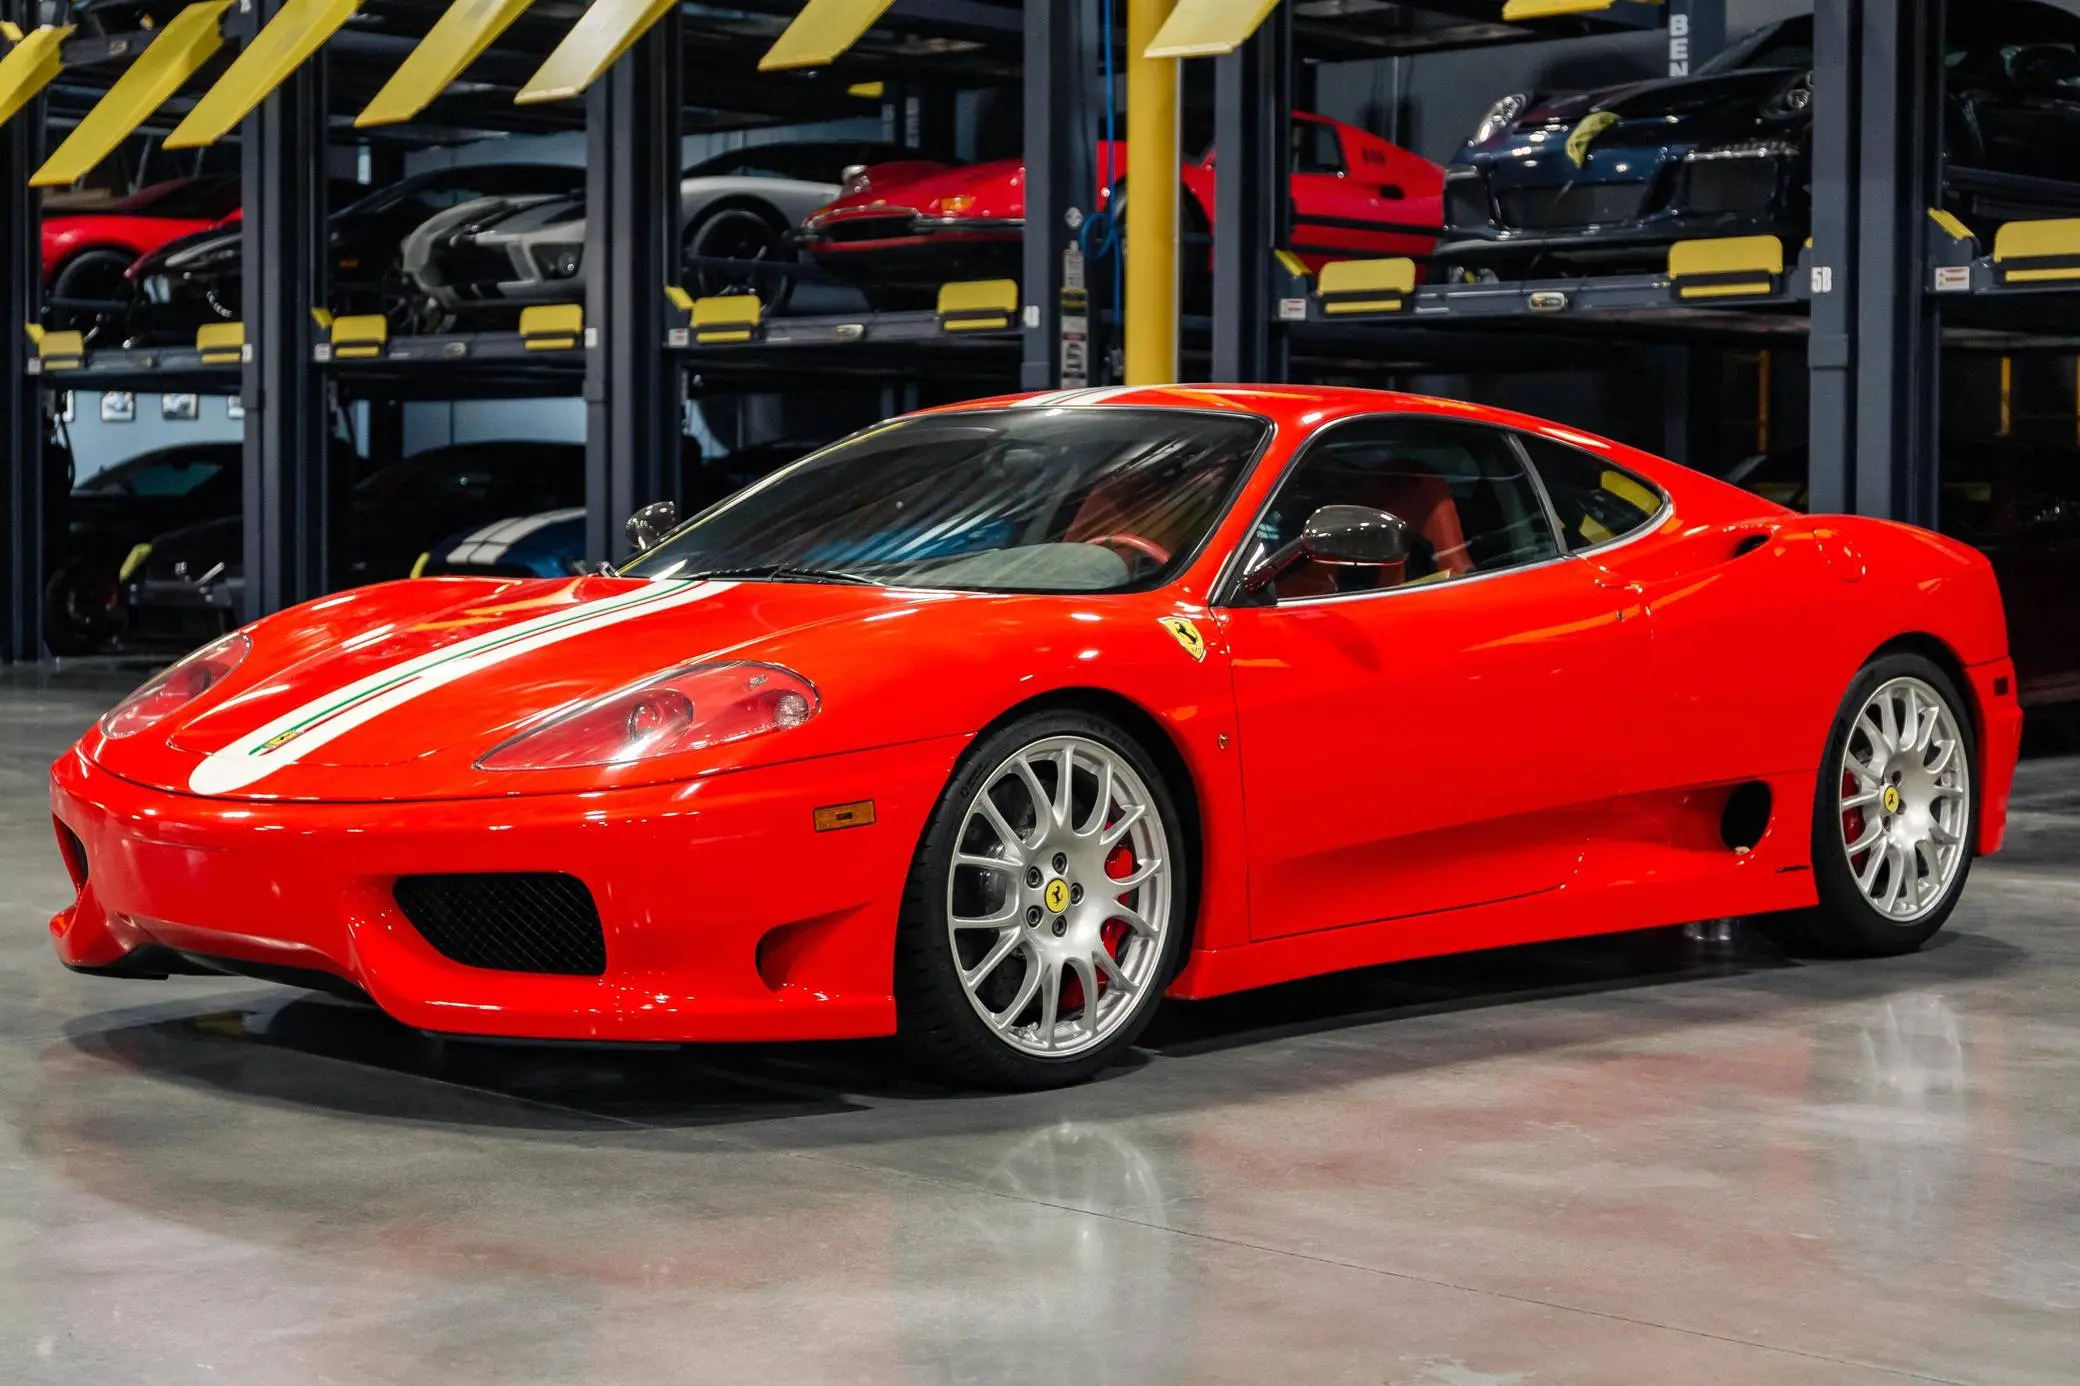 ferrari 360 challenge stradale for sale - How much is a 360 Stradale worth